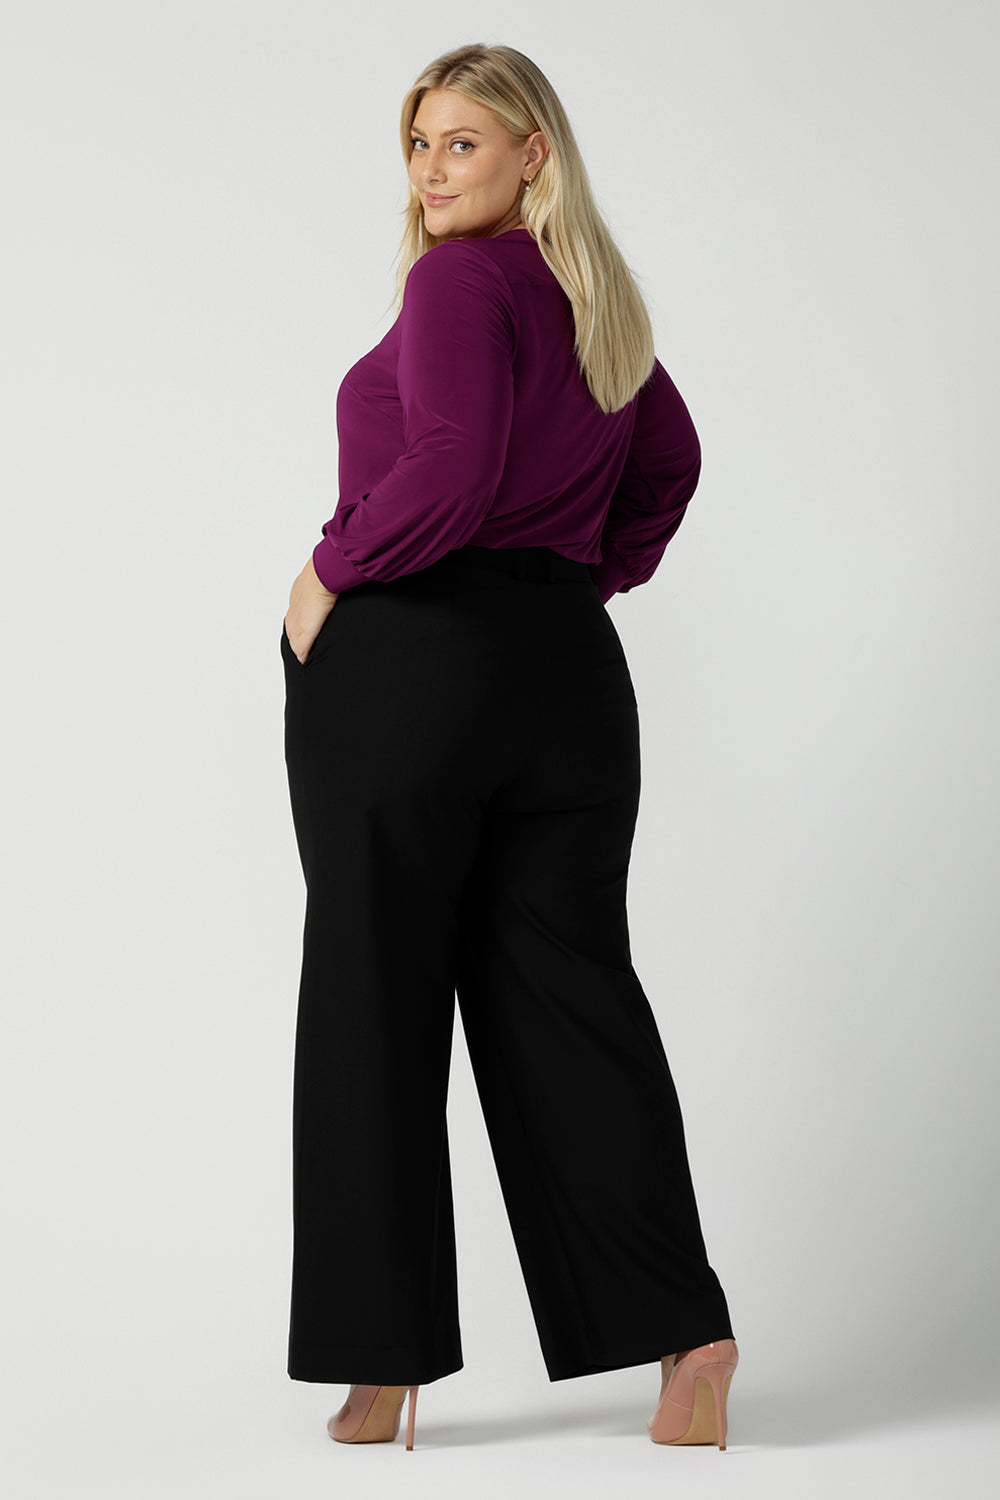 Back view of a size 18 woman wearing the Avery top in Magenta. A soft v-neck top with balloon sleeves and cuff detail. Made in Australia for women size 8 - 24. Styled back with a Kate pant in black